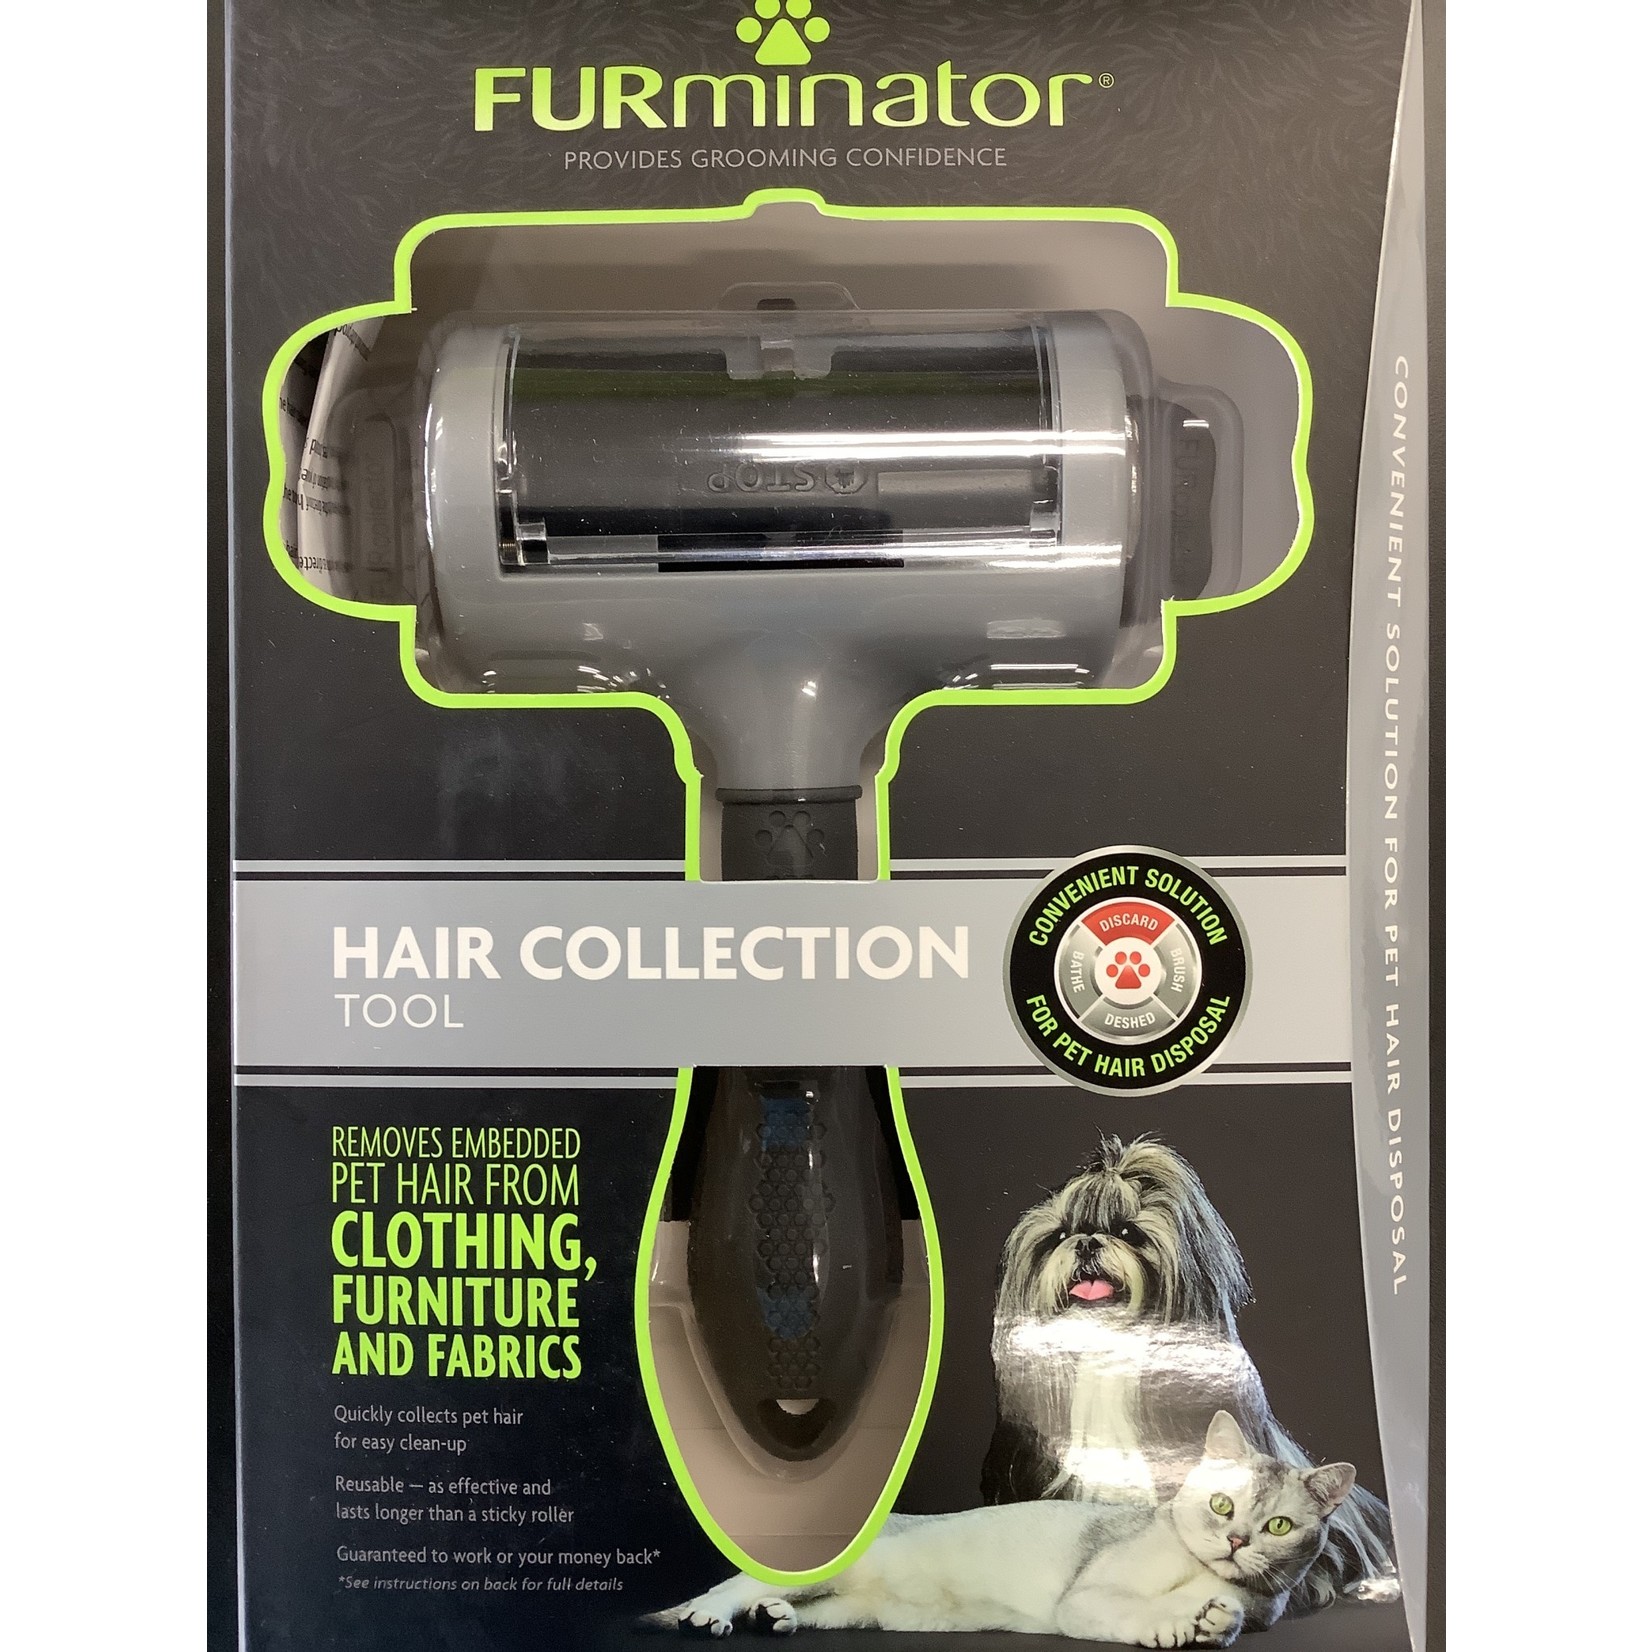 FURMINATOR FURMINATOR. Hair Collection Tool. Removed embedded pet hair from clothing, furniture and fabrics